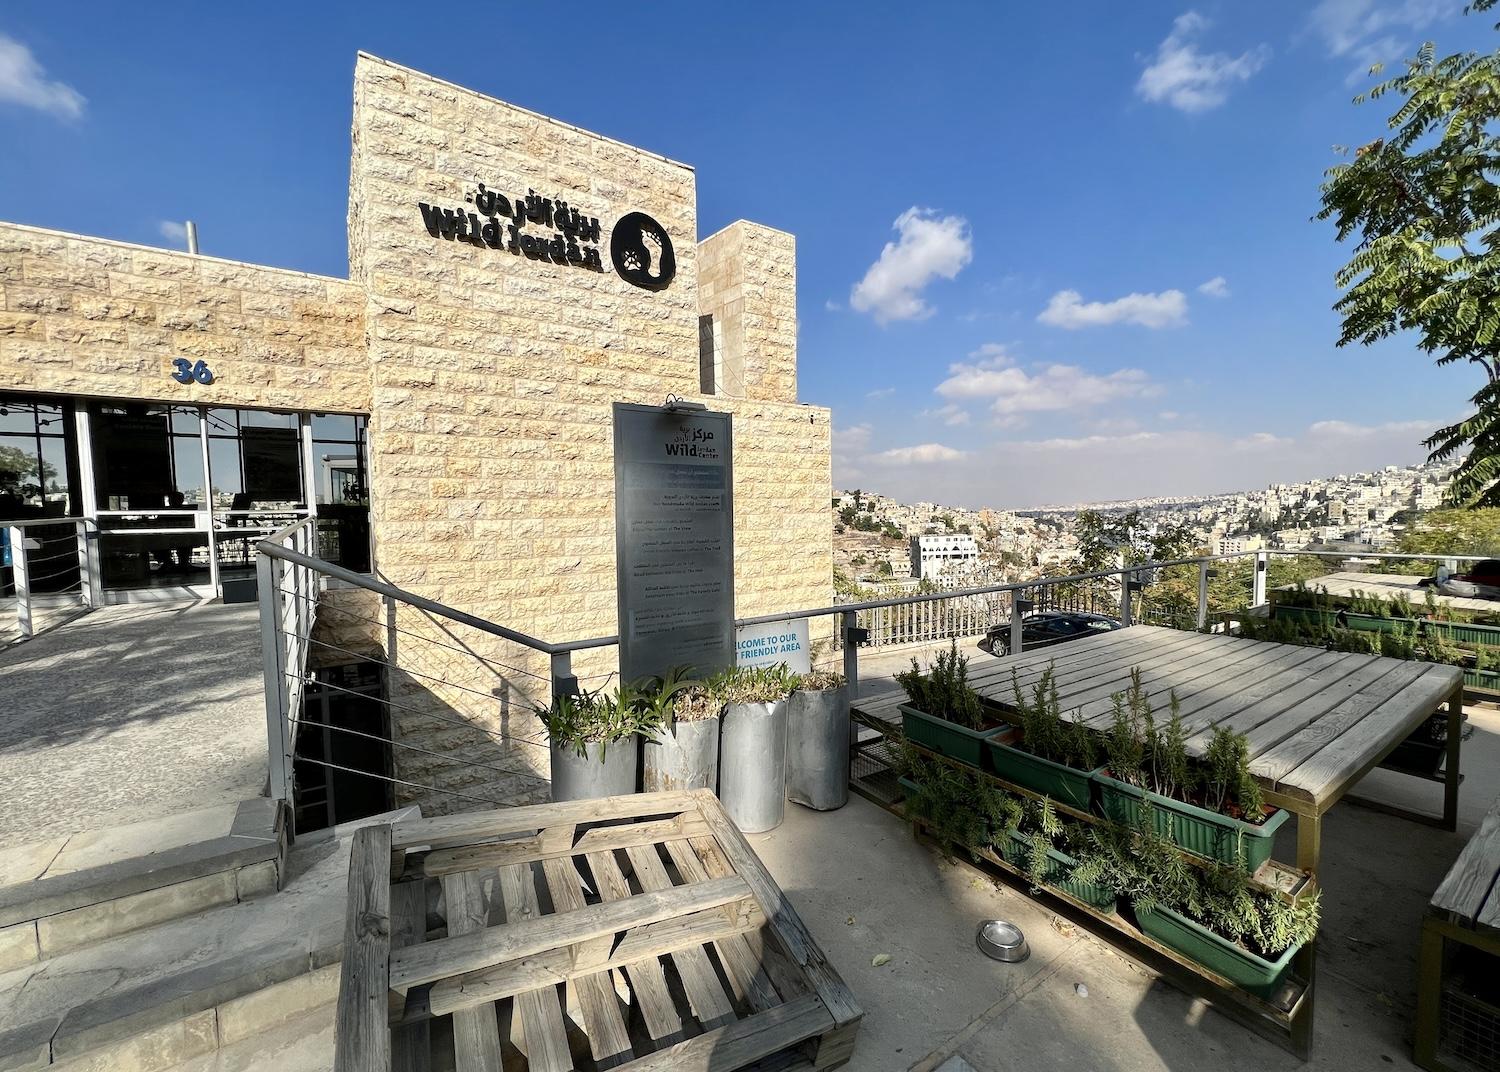 The Royal Society for the Conservation of Nature's Wild Jordan Center overlooks the old city of Amman and boasts a cafe and gift shop.